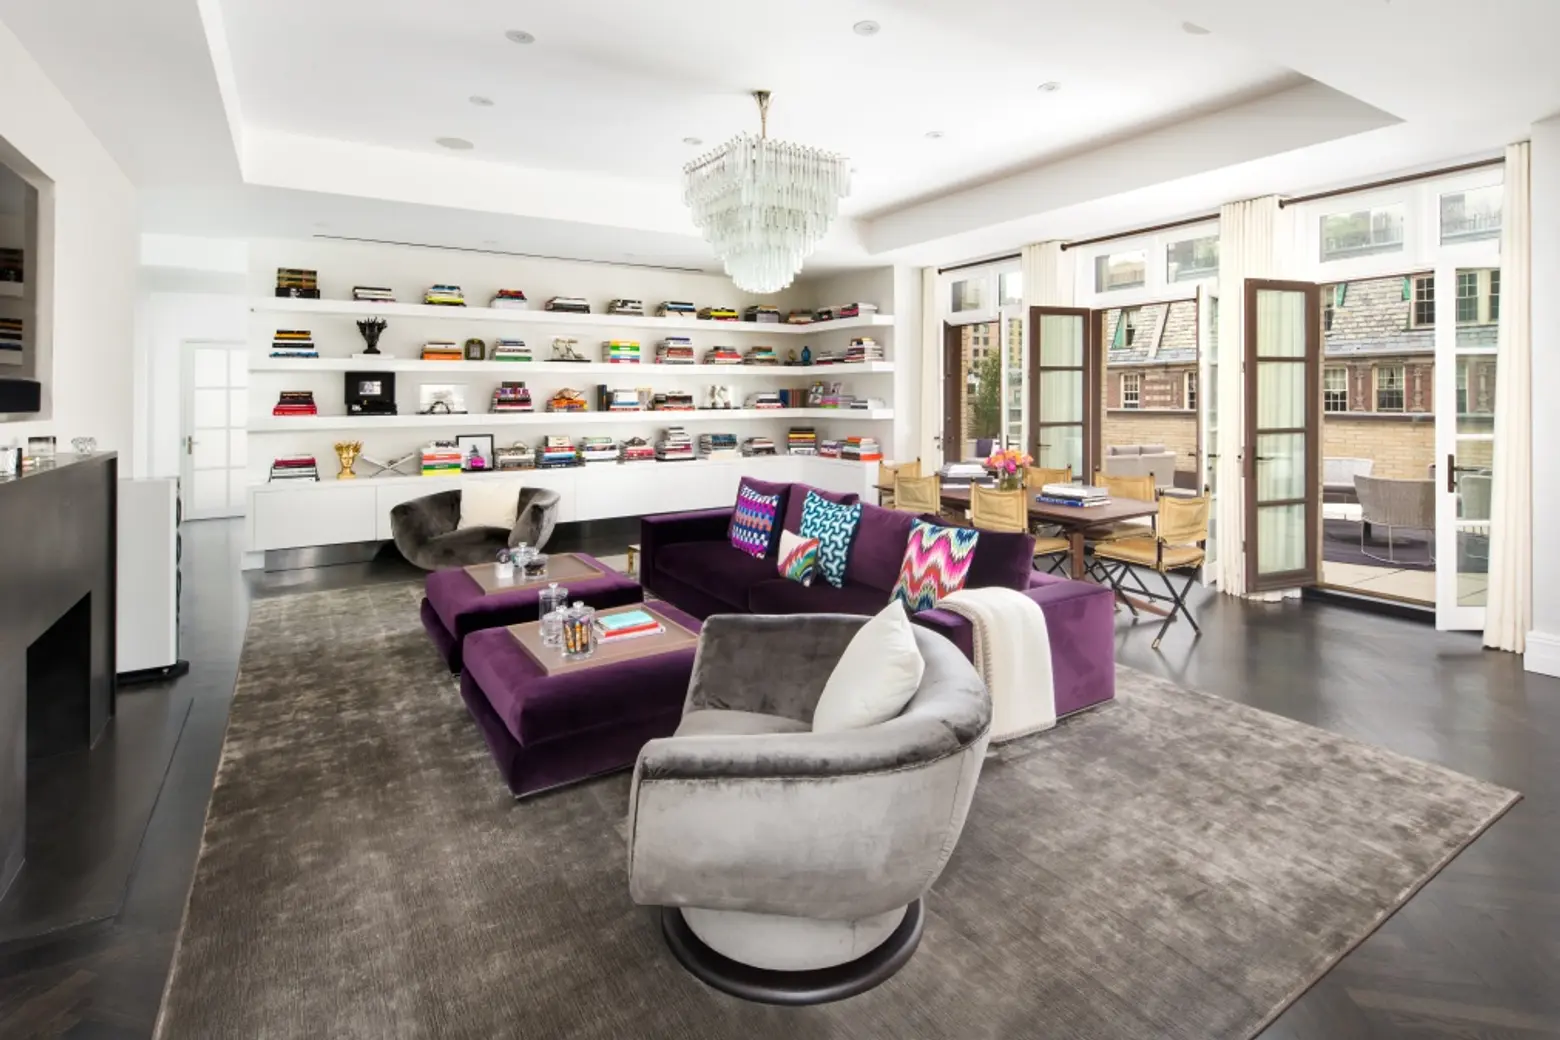 Jimmy Choo co-founder Tamara Mellon finally sells UES penthouse at a $14M discount